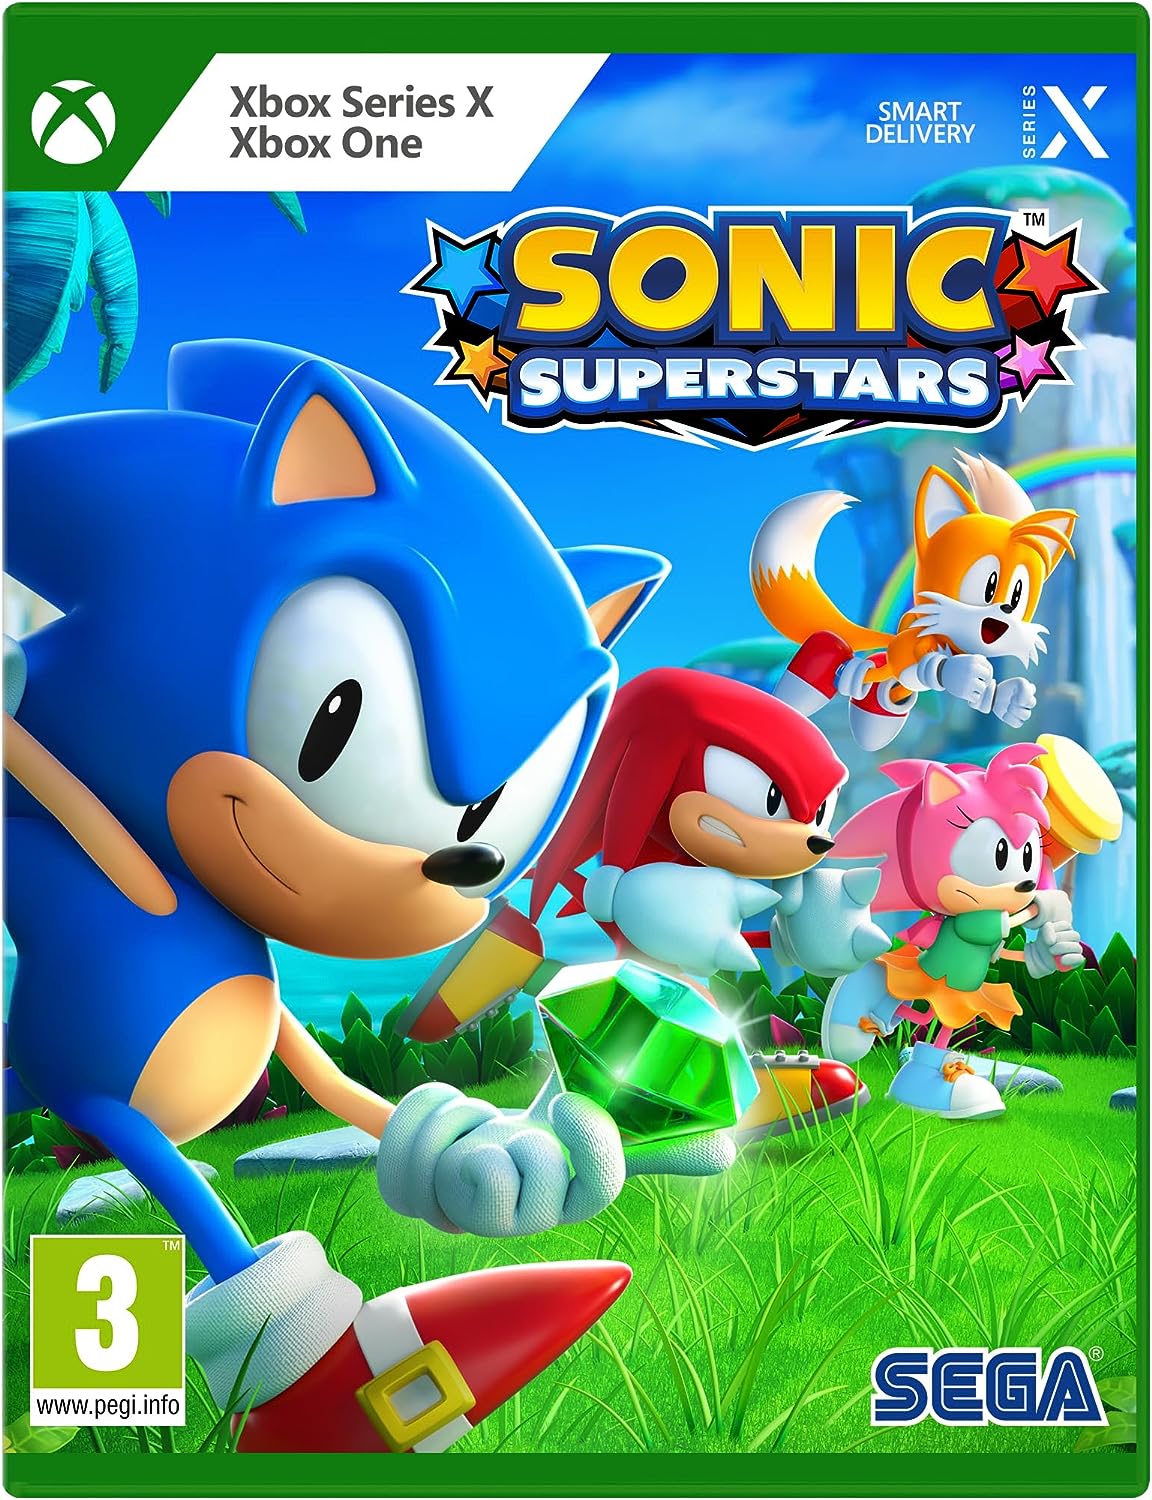 Sonic Superstars (Xbox one and Series X)